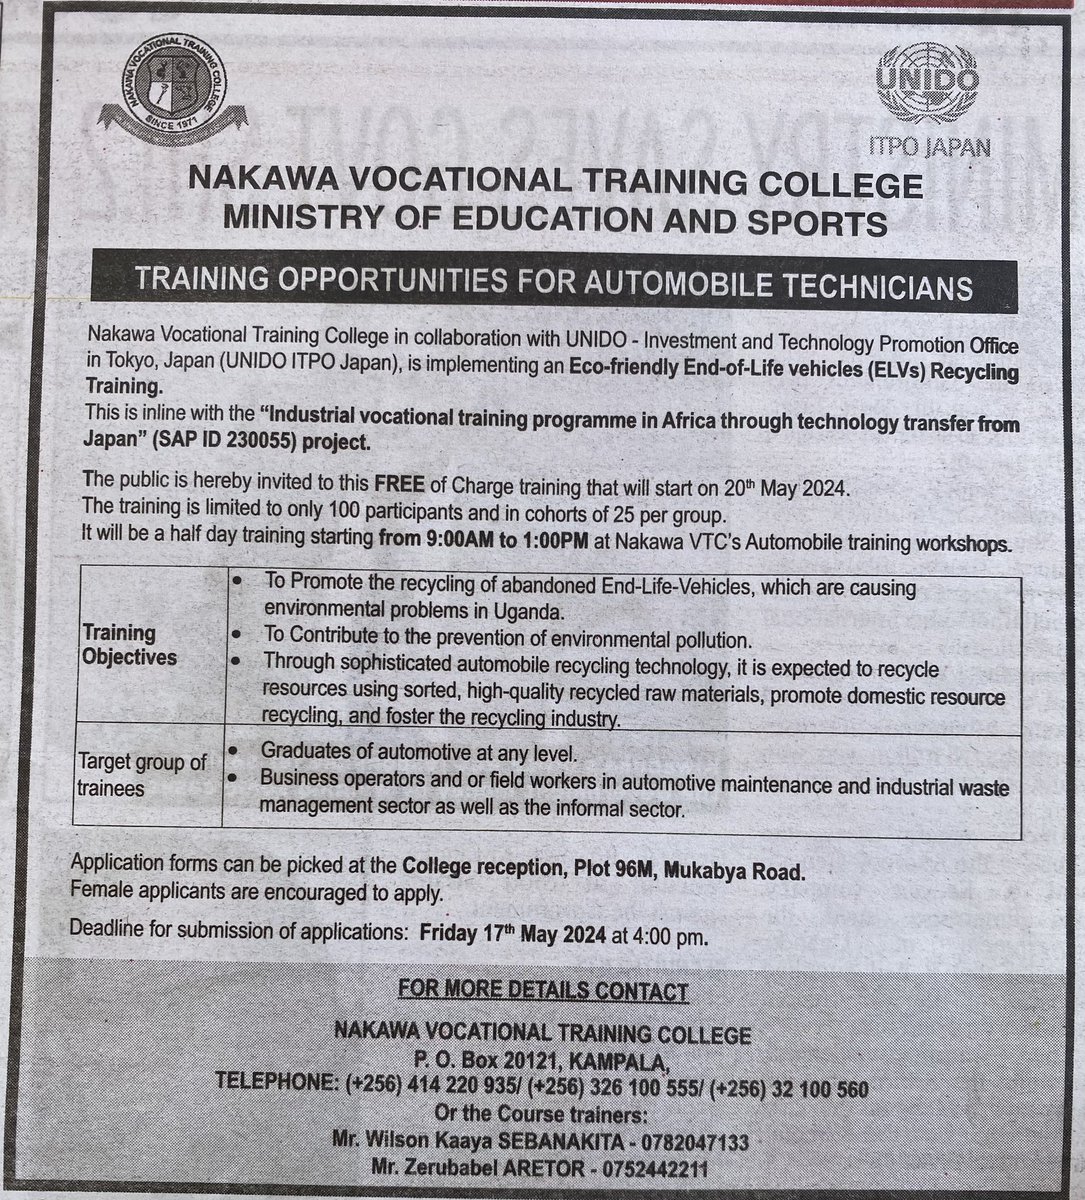 FREE of Charge Training for 100 Automobile Technicians at Nakawa Vocational Training College in partnership with UNIDO ITPO Japan.

Retweet to share widely